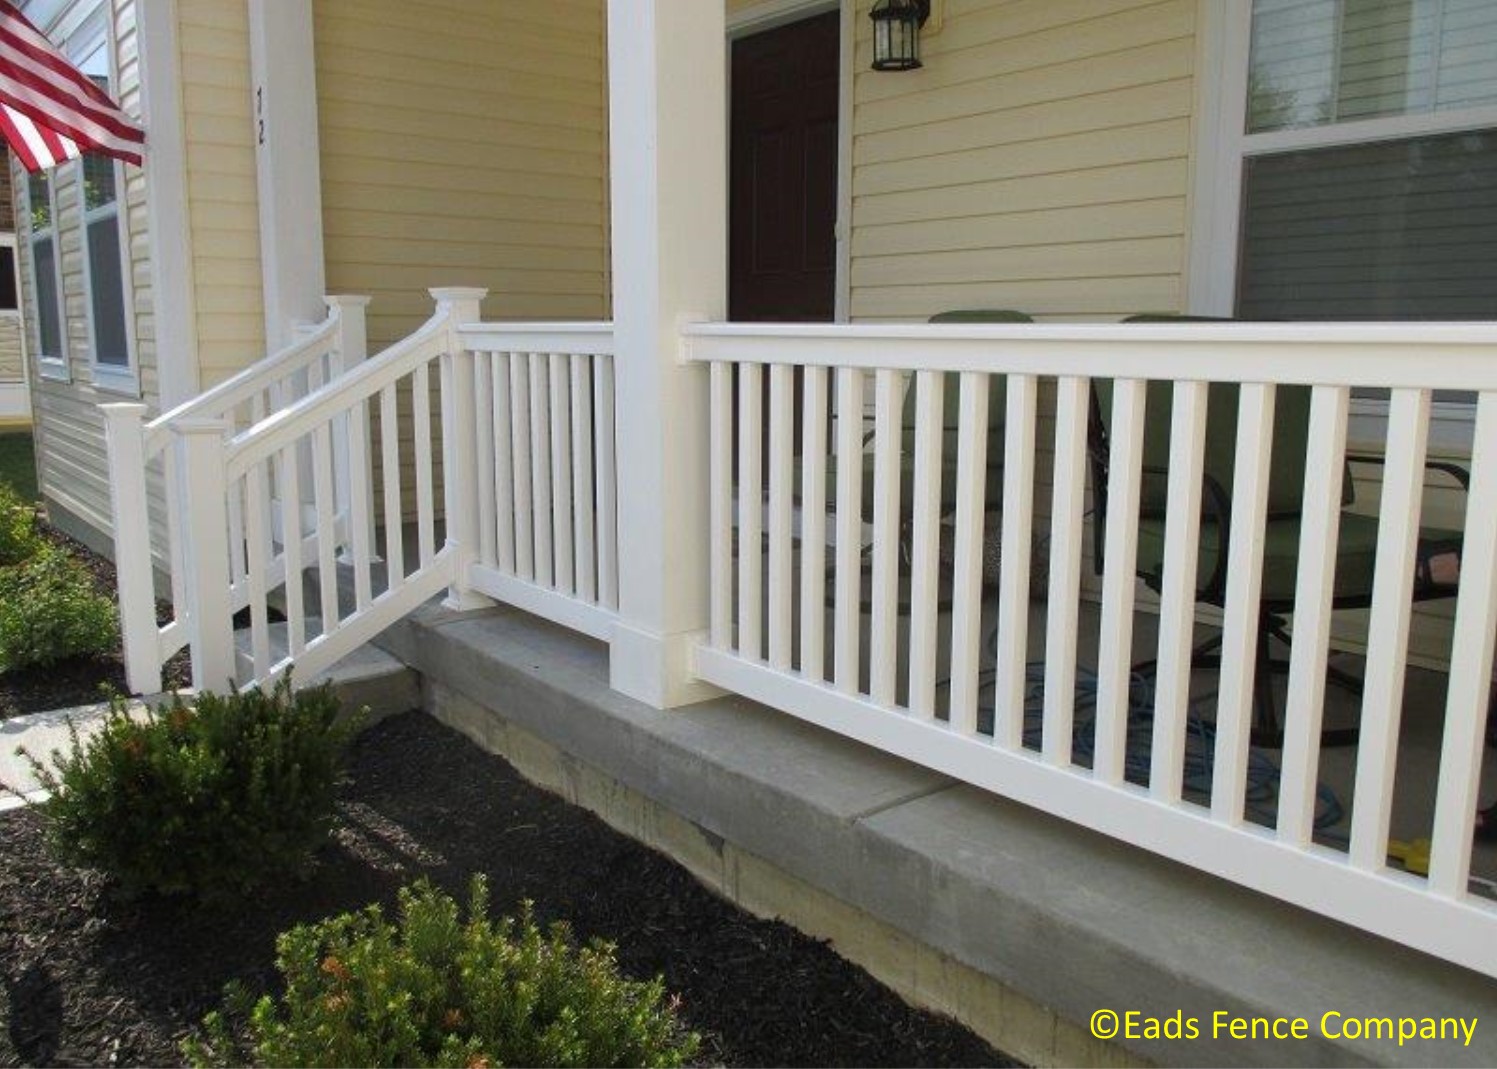 Show products in category Railings & Handrails